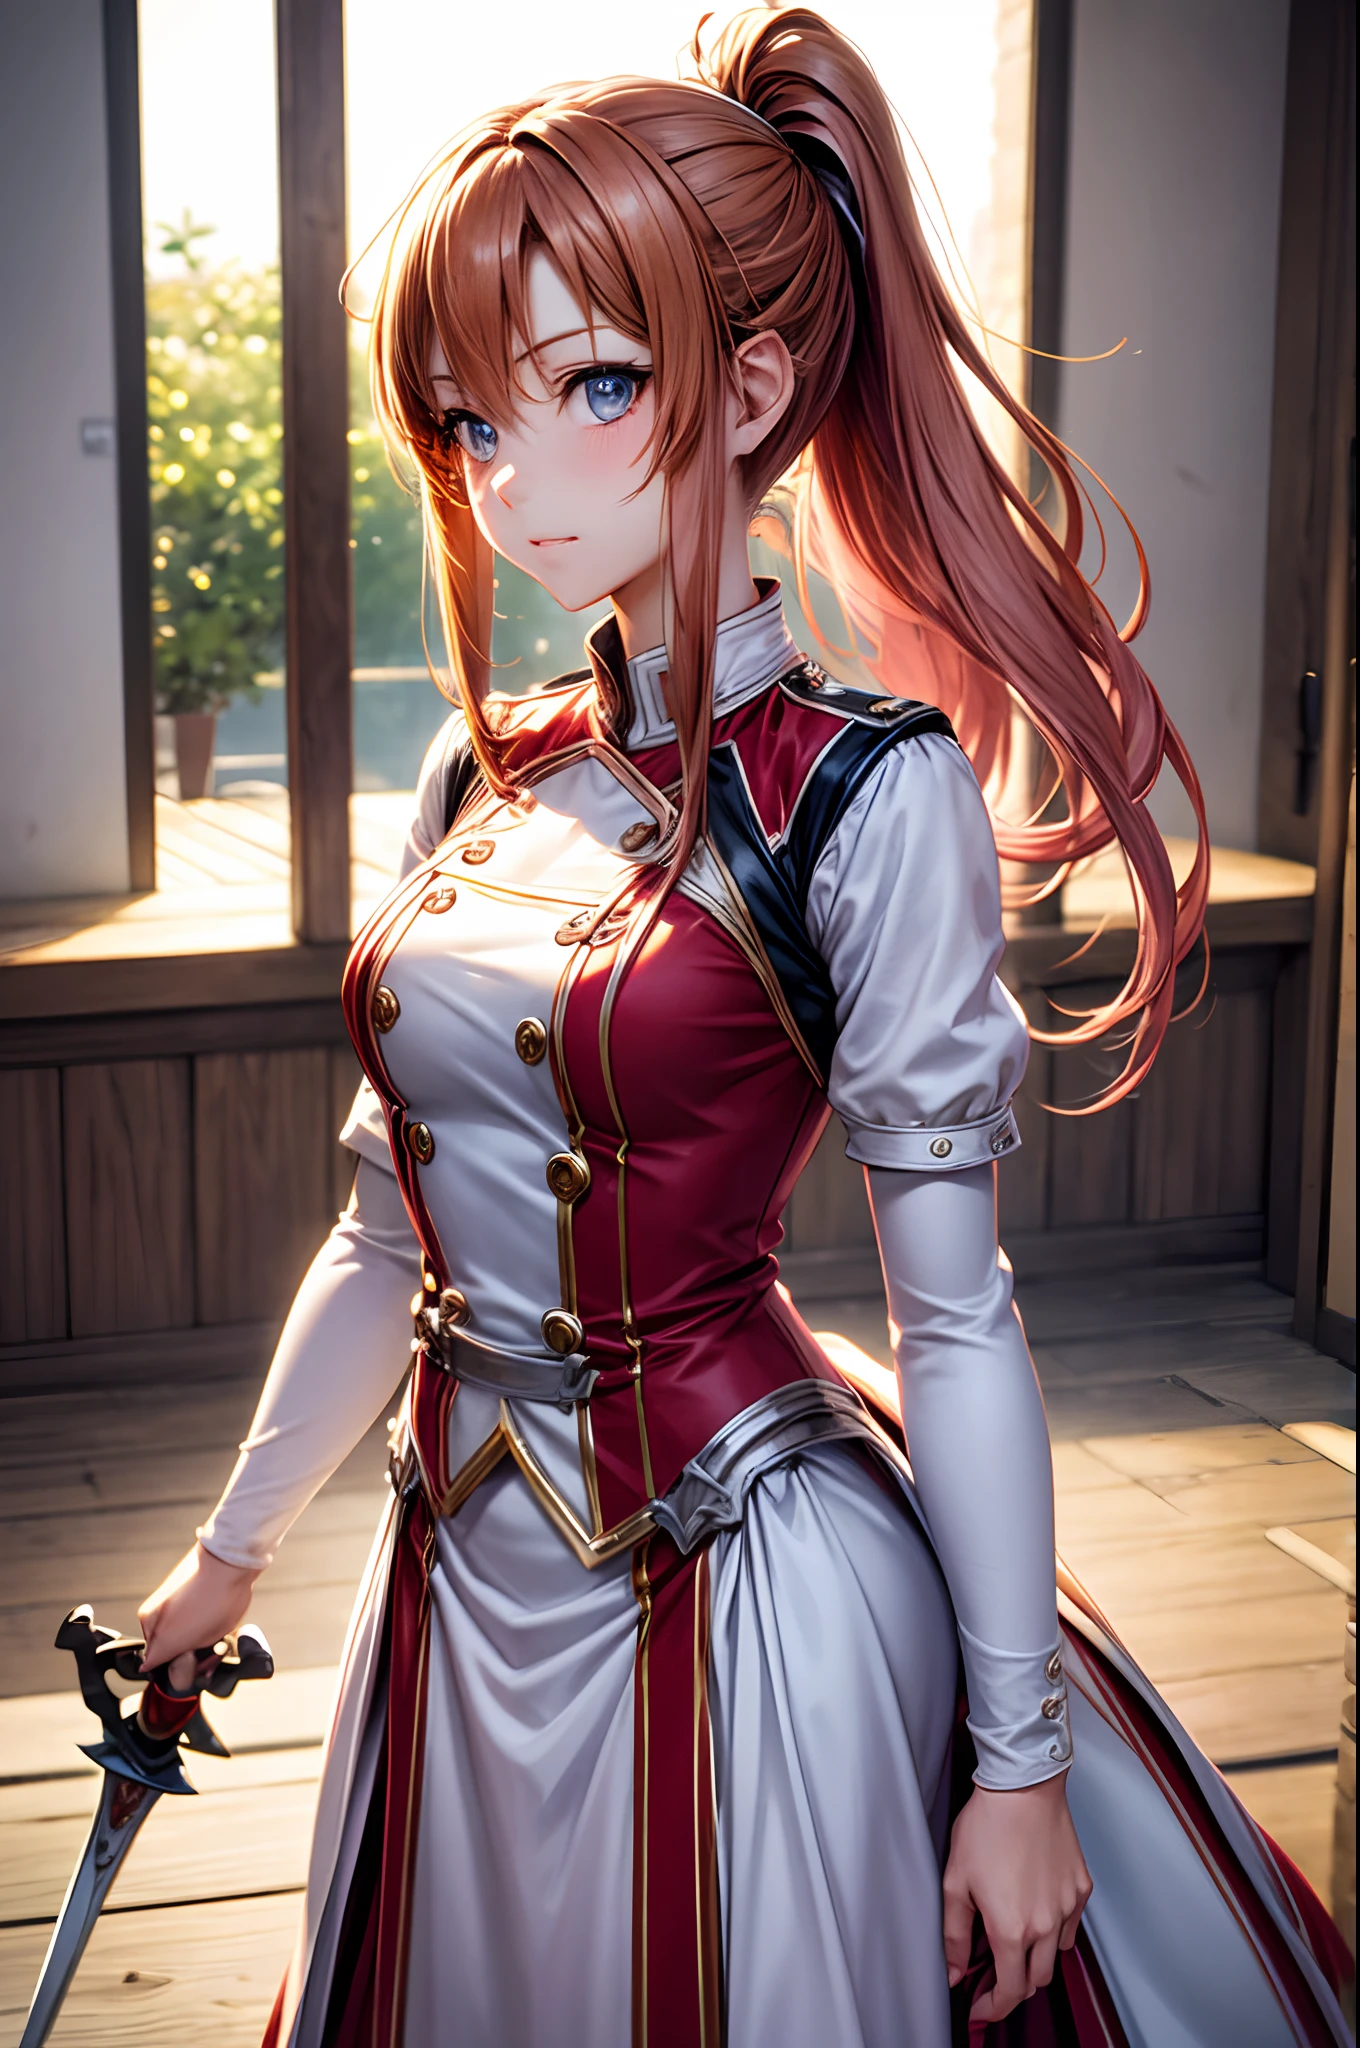 best pictures, masutepiece, ​masterpiece、super precision、sword in hands、[[rapier:1.10]]、High quality anime girl with brown hair and brown eyes、[3D images:1.25],[[Attractive eyes,A detailed eye、radiant eyes, Colorful eyes:1.25]]、the whole、front-facing view、Short ponytail, Pink hair、Solo Girl,red and white uniform, 8k picture、Dress correctly、best pictures, masutepiece, Photorealistic, Soft light, Attractive eyes that make you feel sucked in、Cowboy Shot、Kawaii Girl